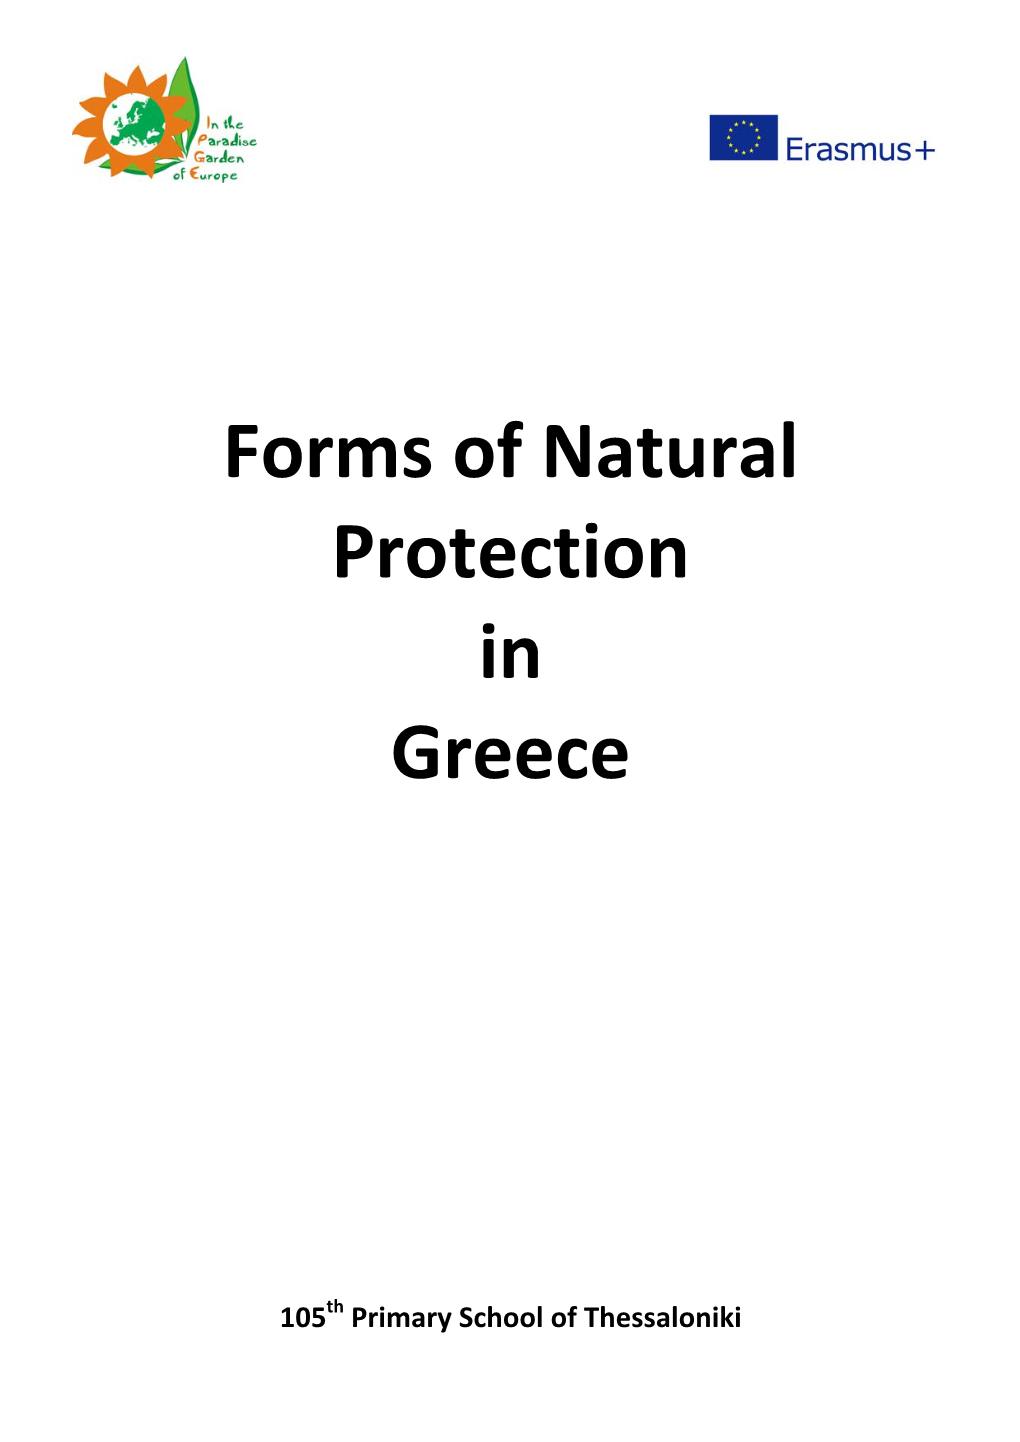 Forms of Natural Protection in Greece